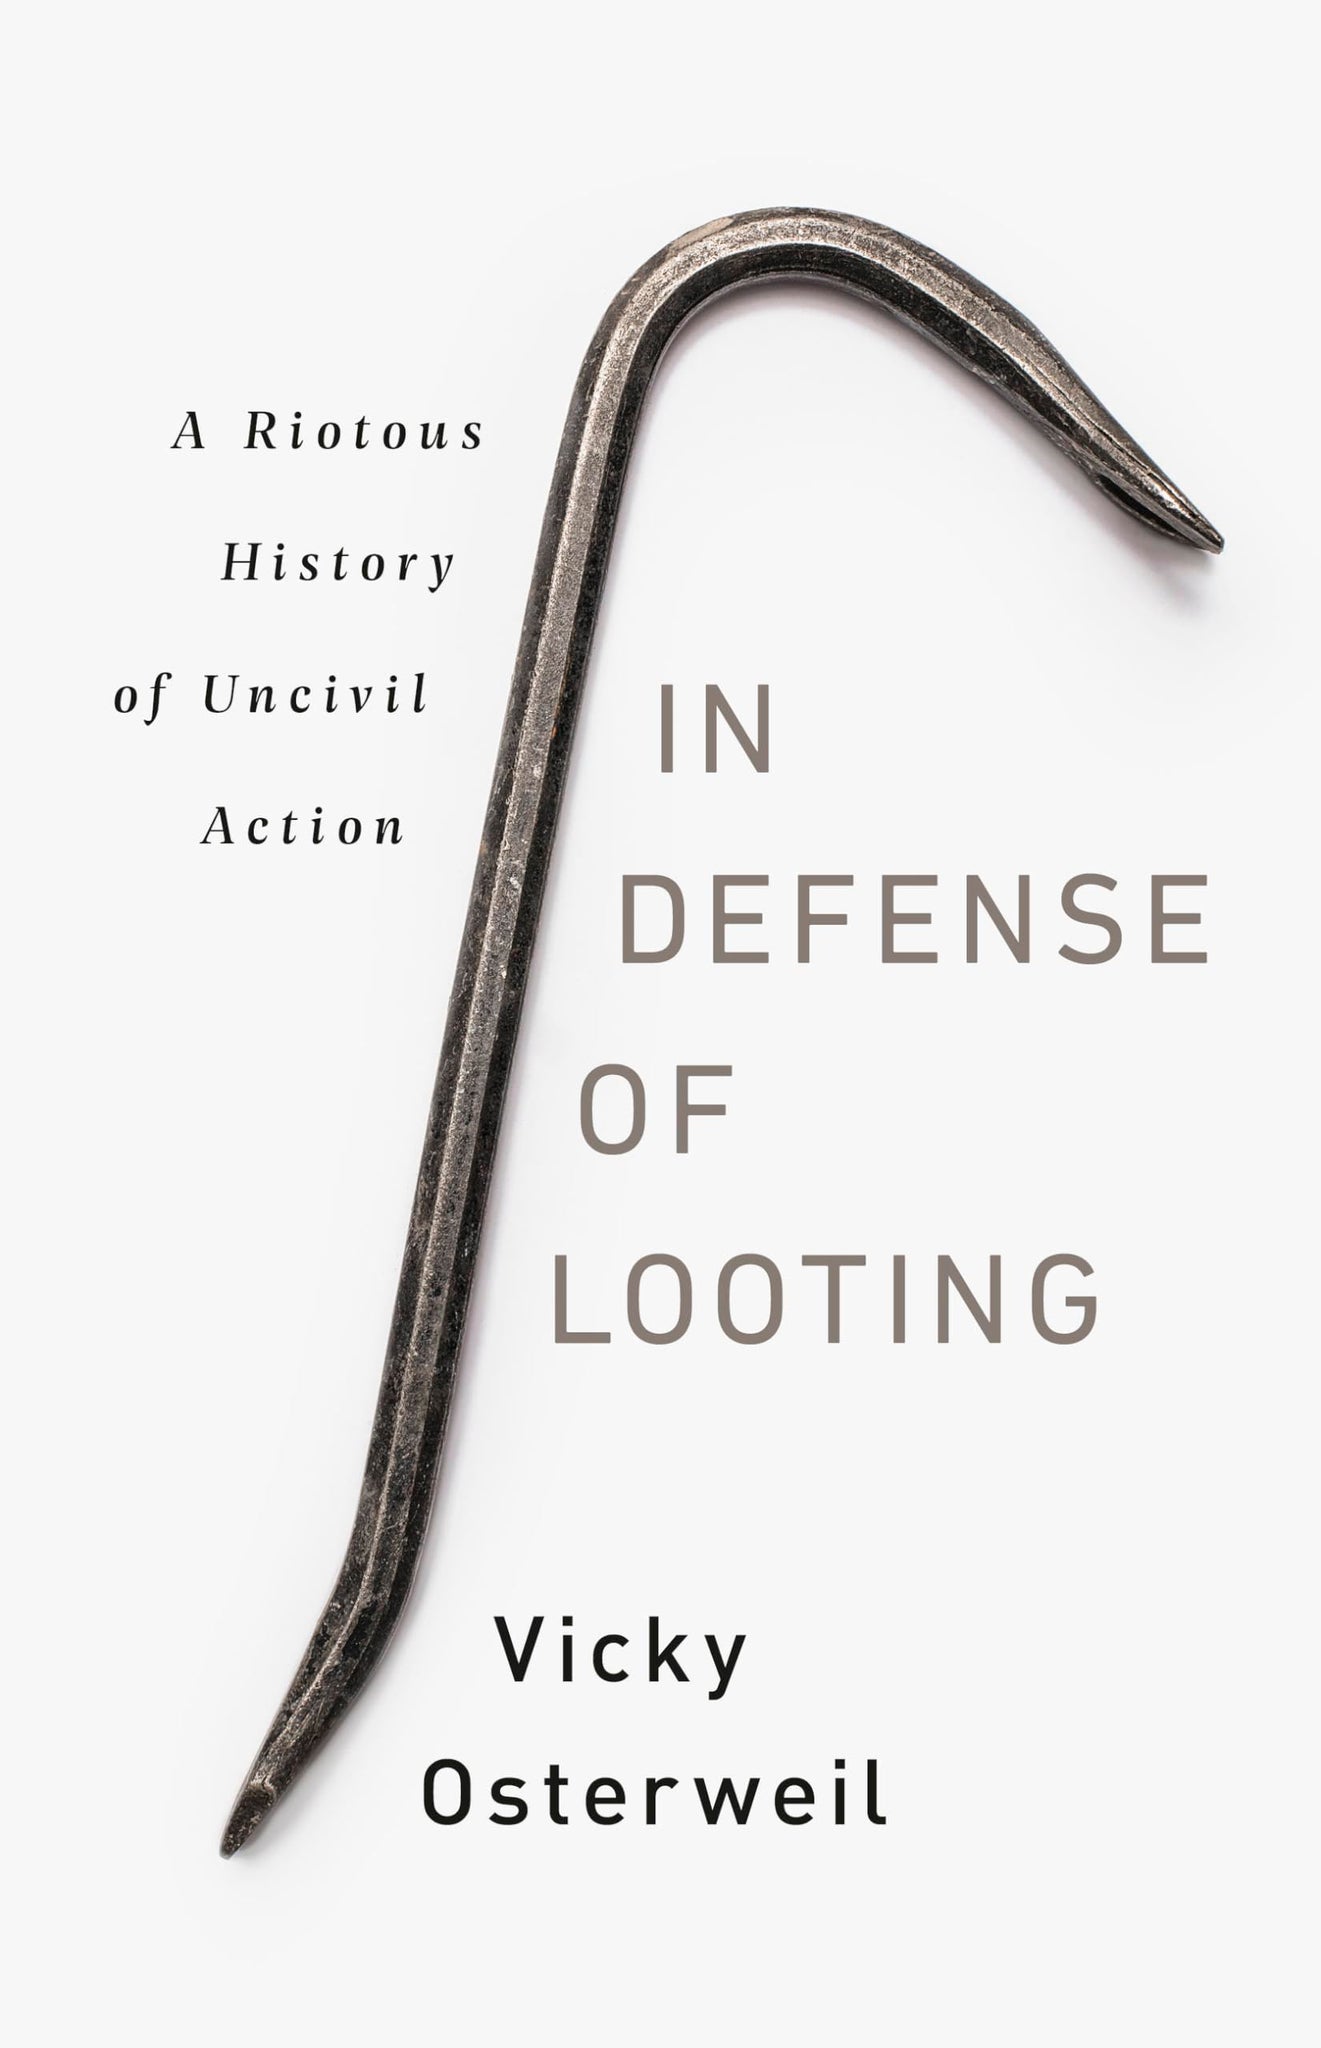 In Defense of Looting: A Riotous History of Uncivil Action (Hardcover)